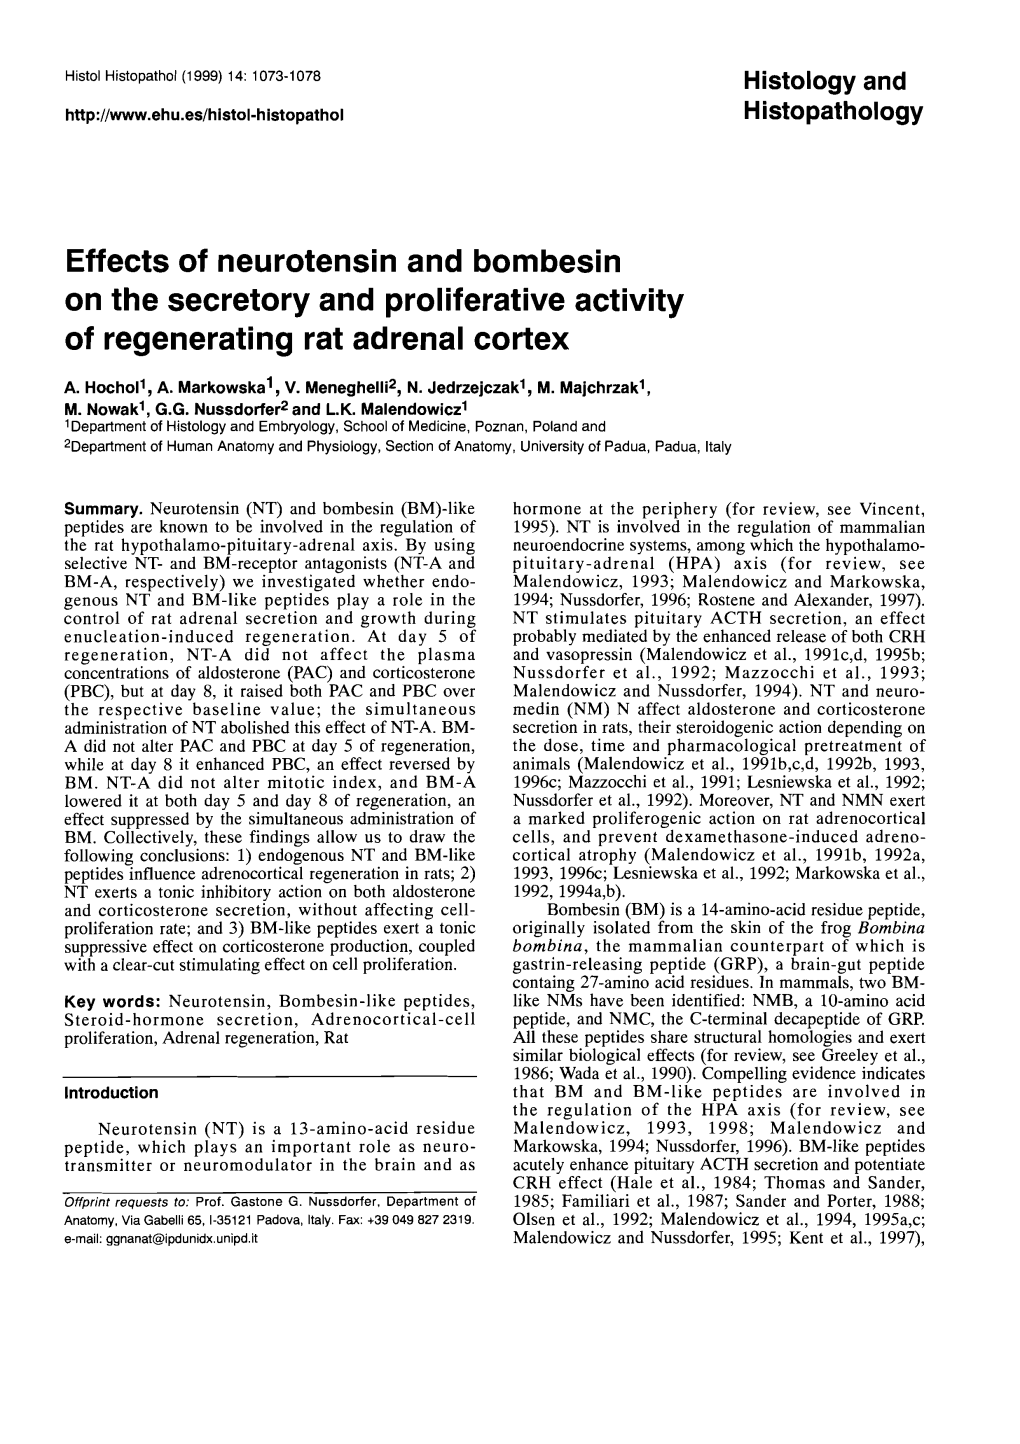 Effects of Neurotensin and Bombesin on the Secretory and Proliferative Activity of Regenerating Rat Adrenal Cortex